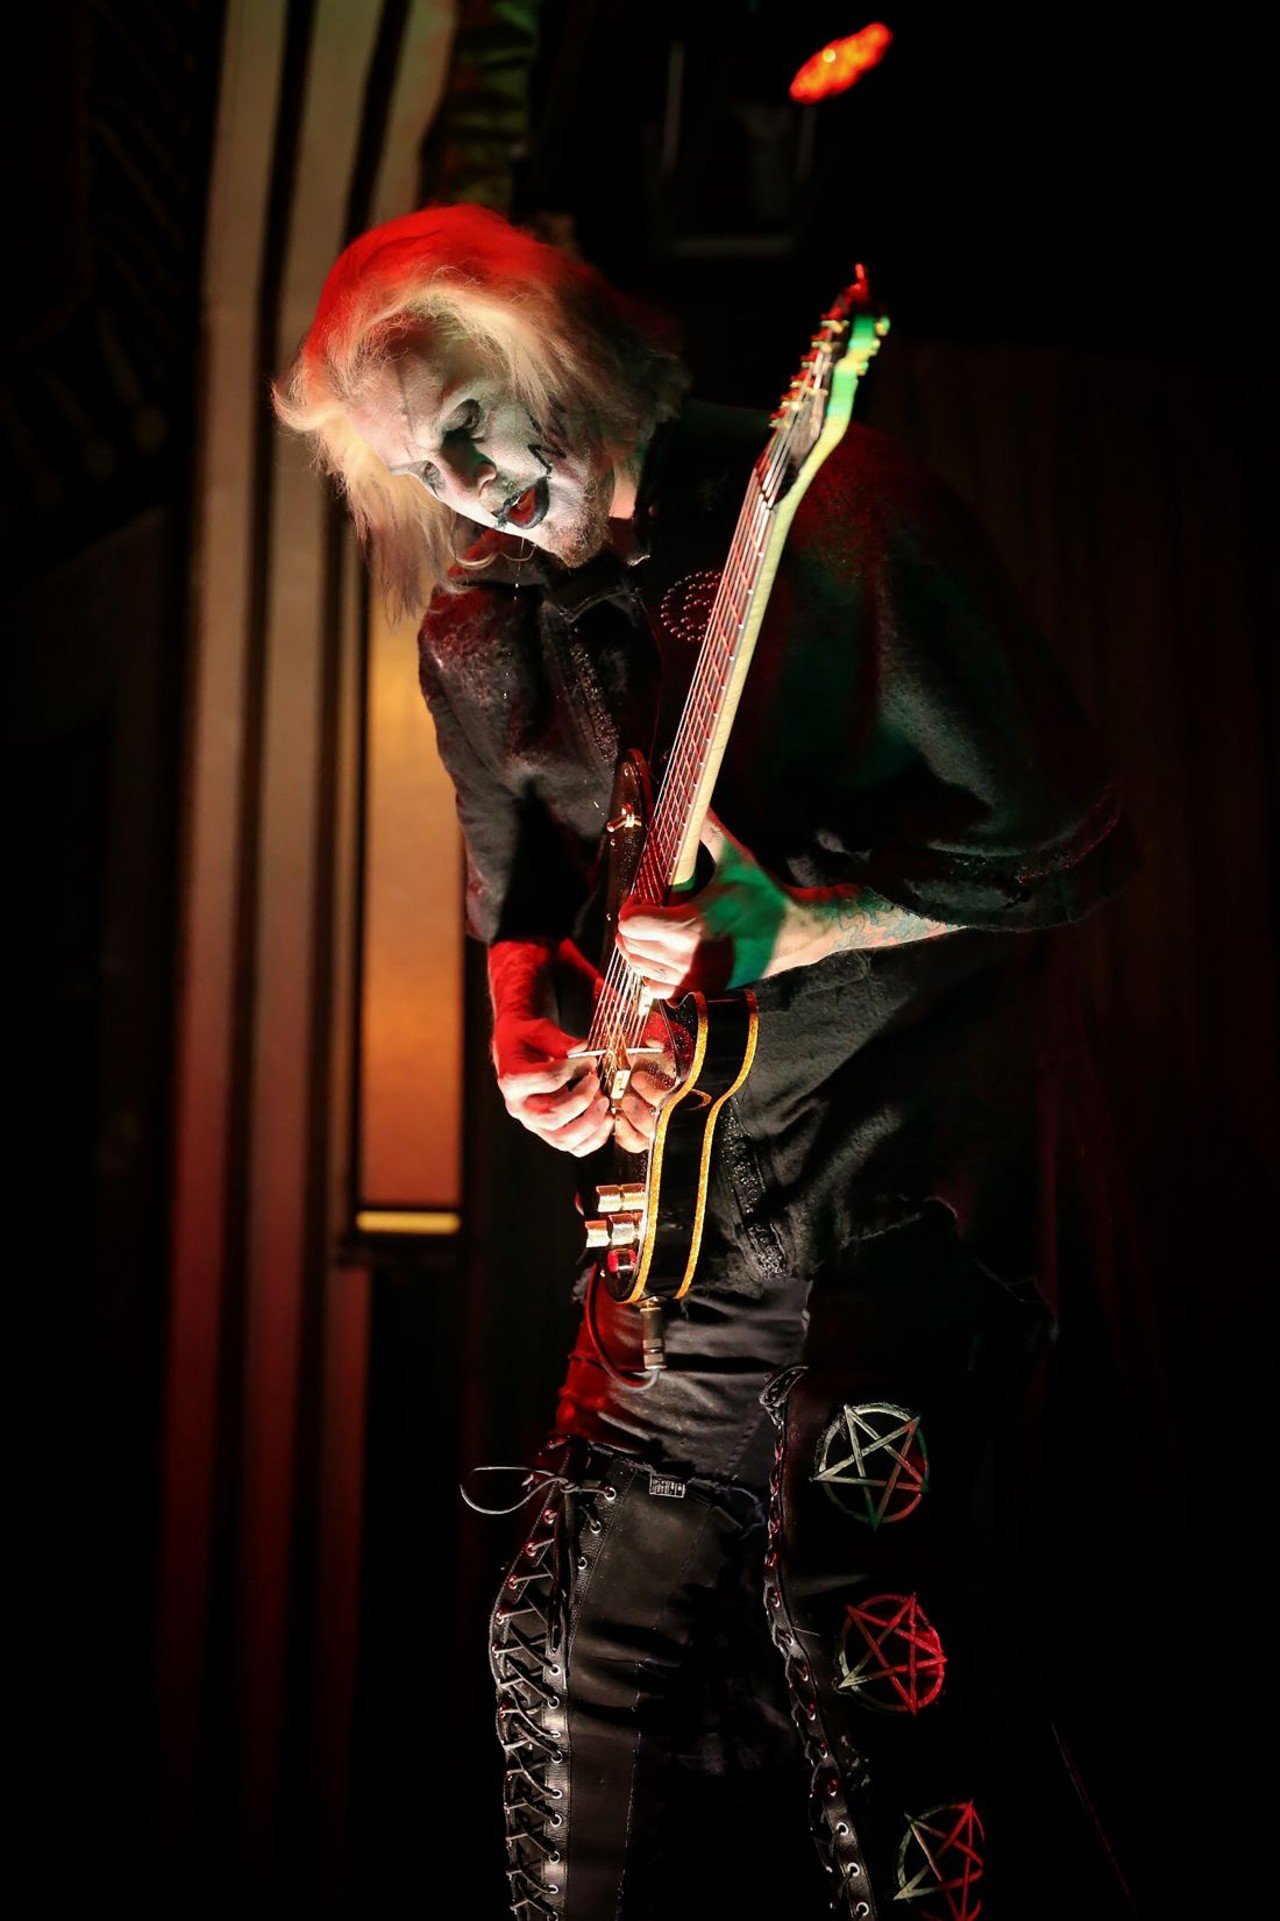 John 5 and the Creatures Performing at the Beachland